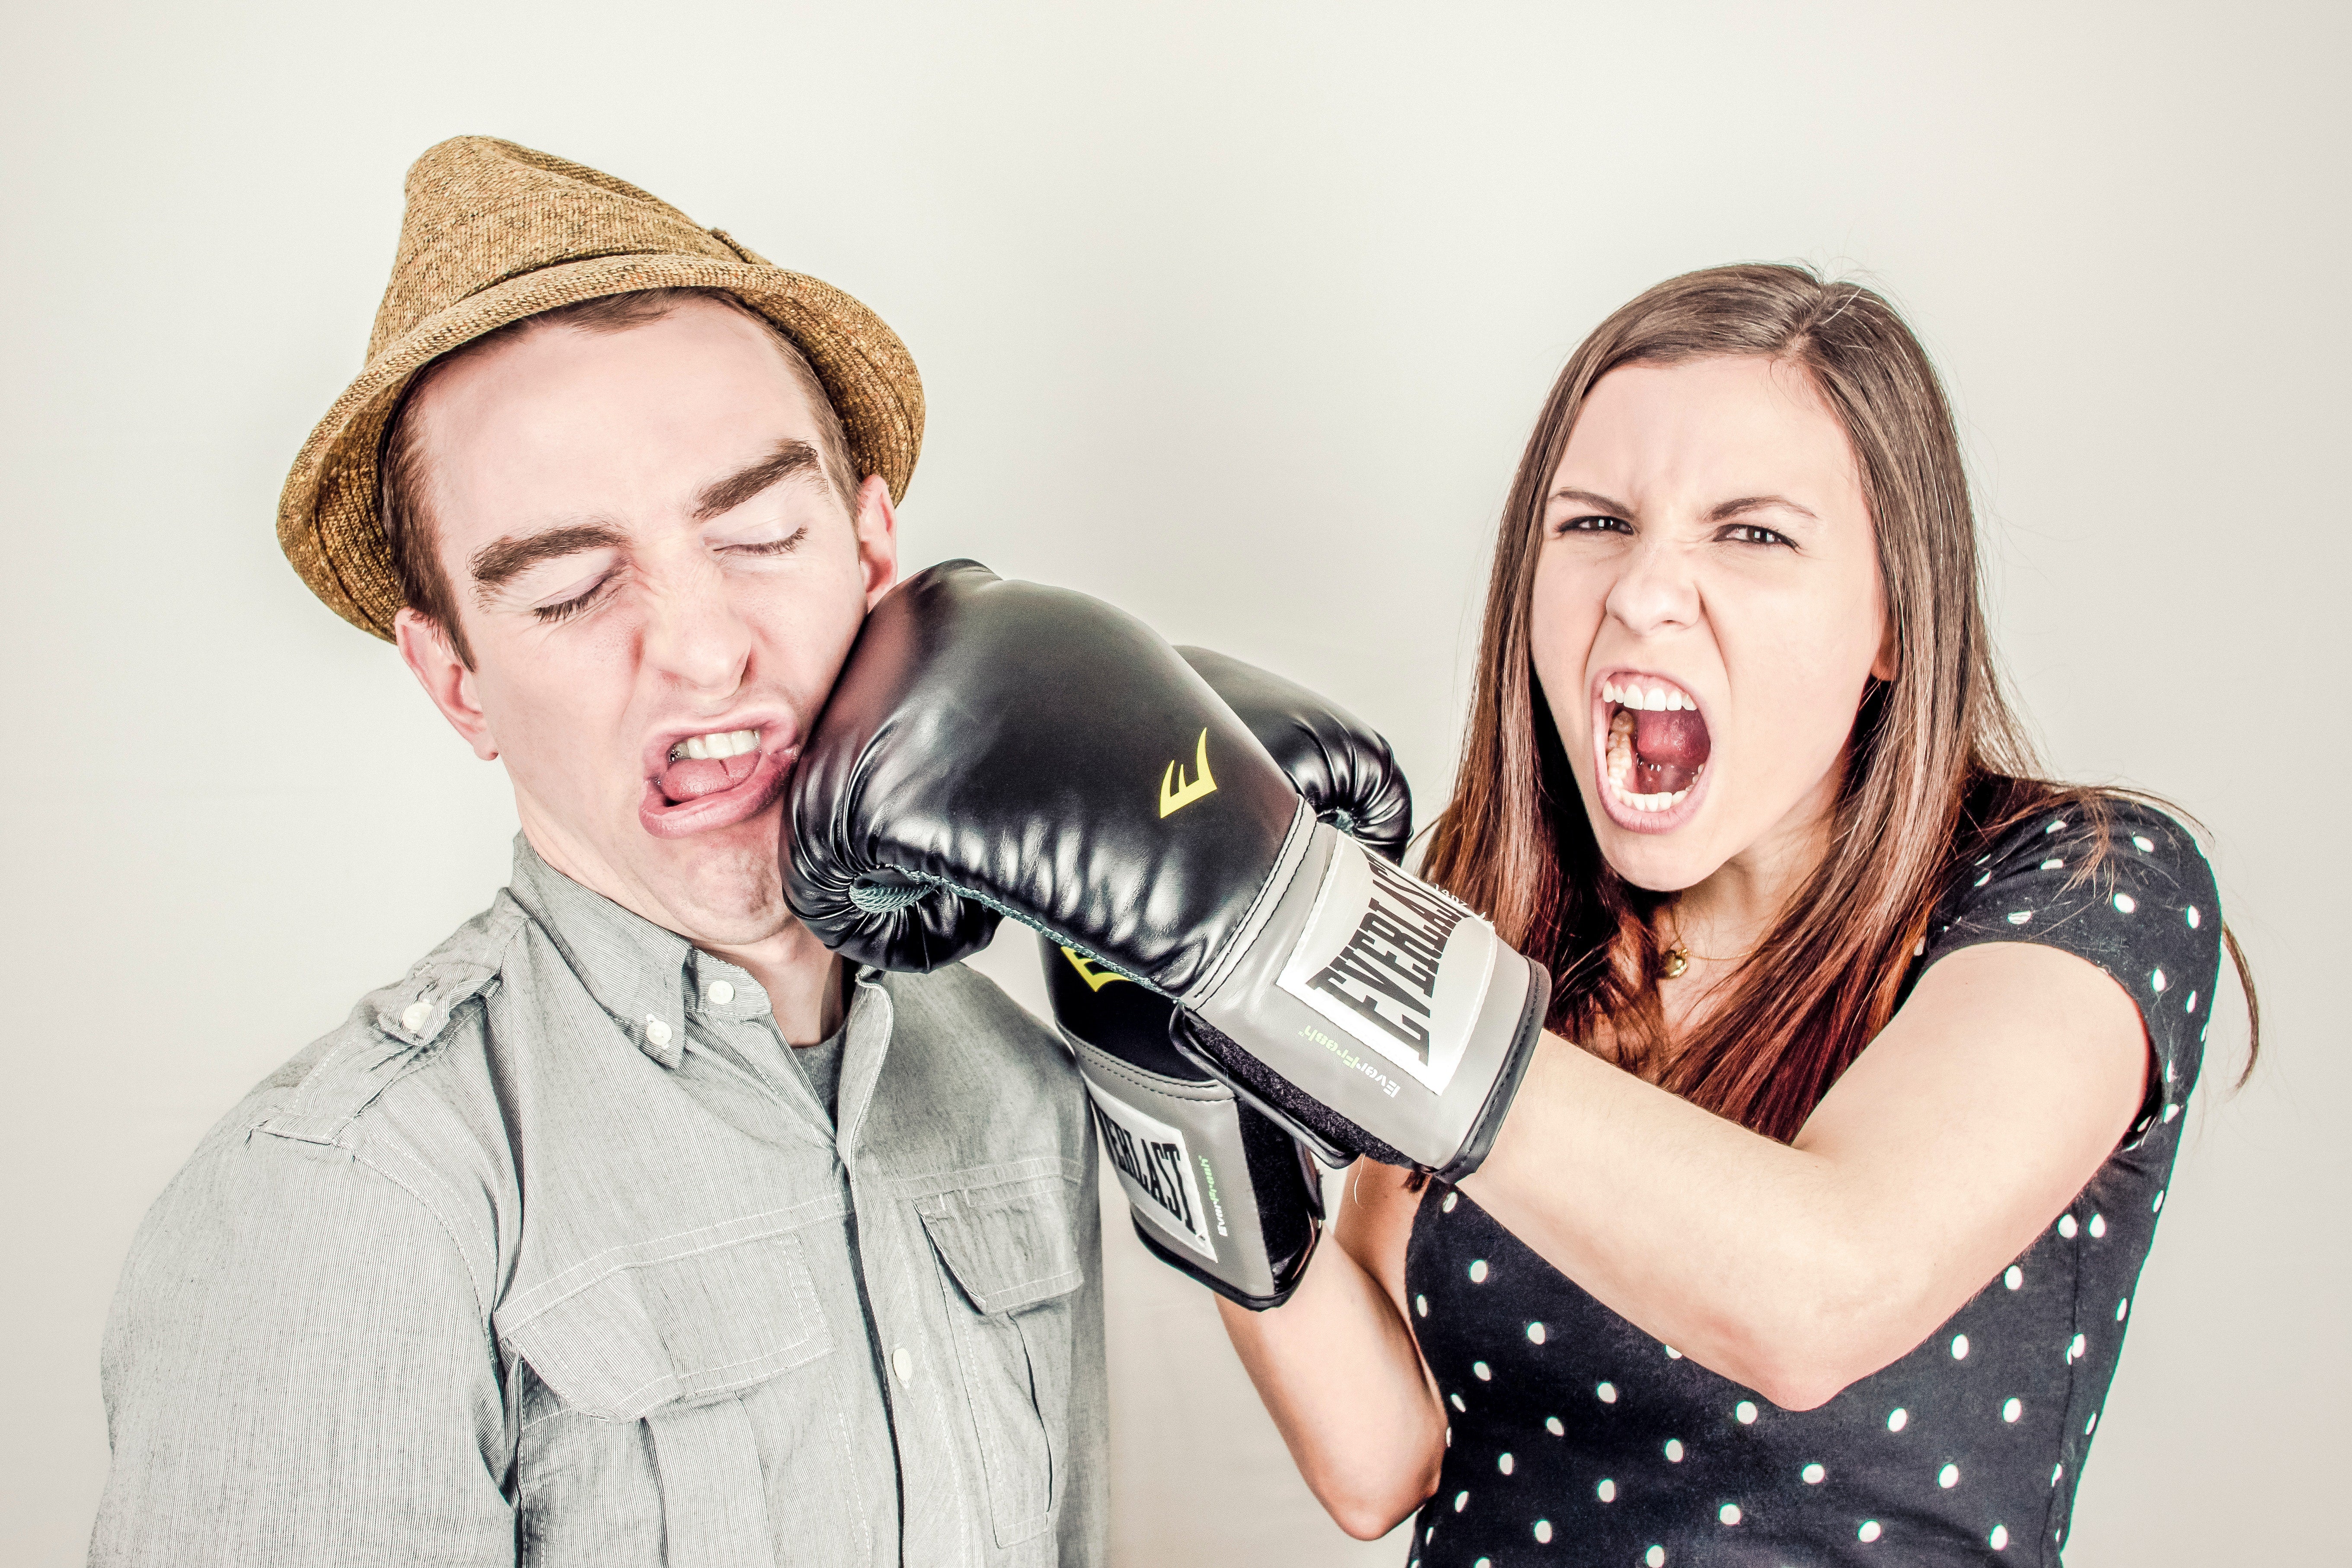 Dealing with Difficult People – the Dos and Don’ts